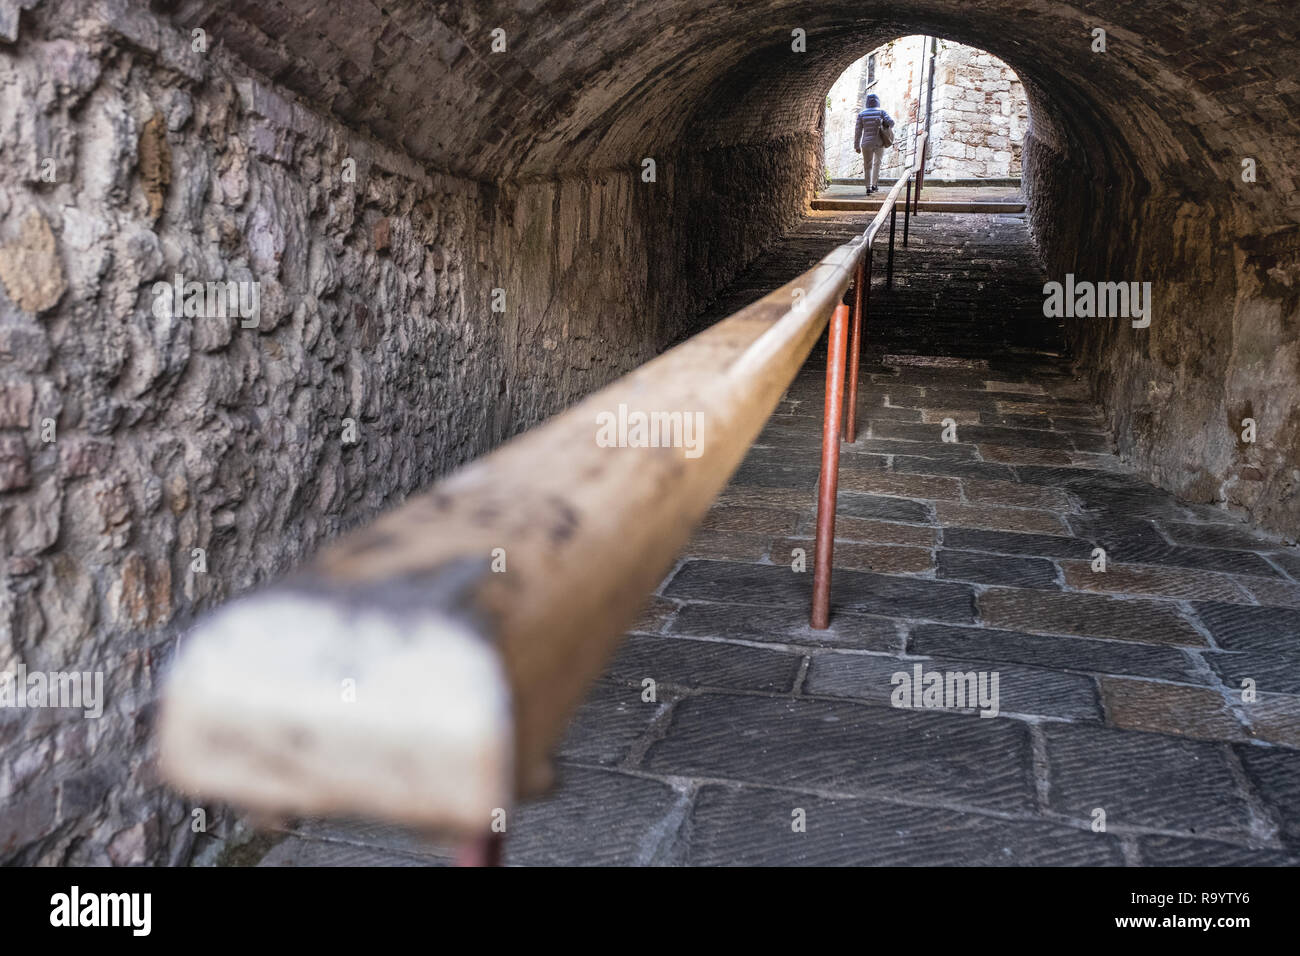 Road behind the walls with the pedestrian access gallery to the medieval village of Colle di Val d'Elsa, Siena, Tuscany Stock Photo